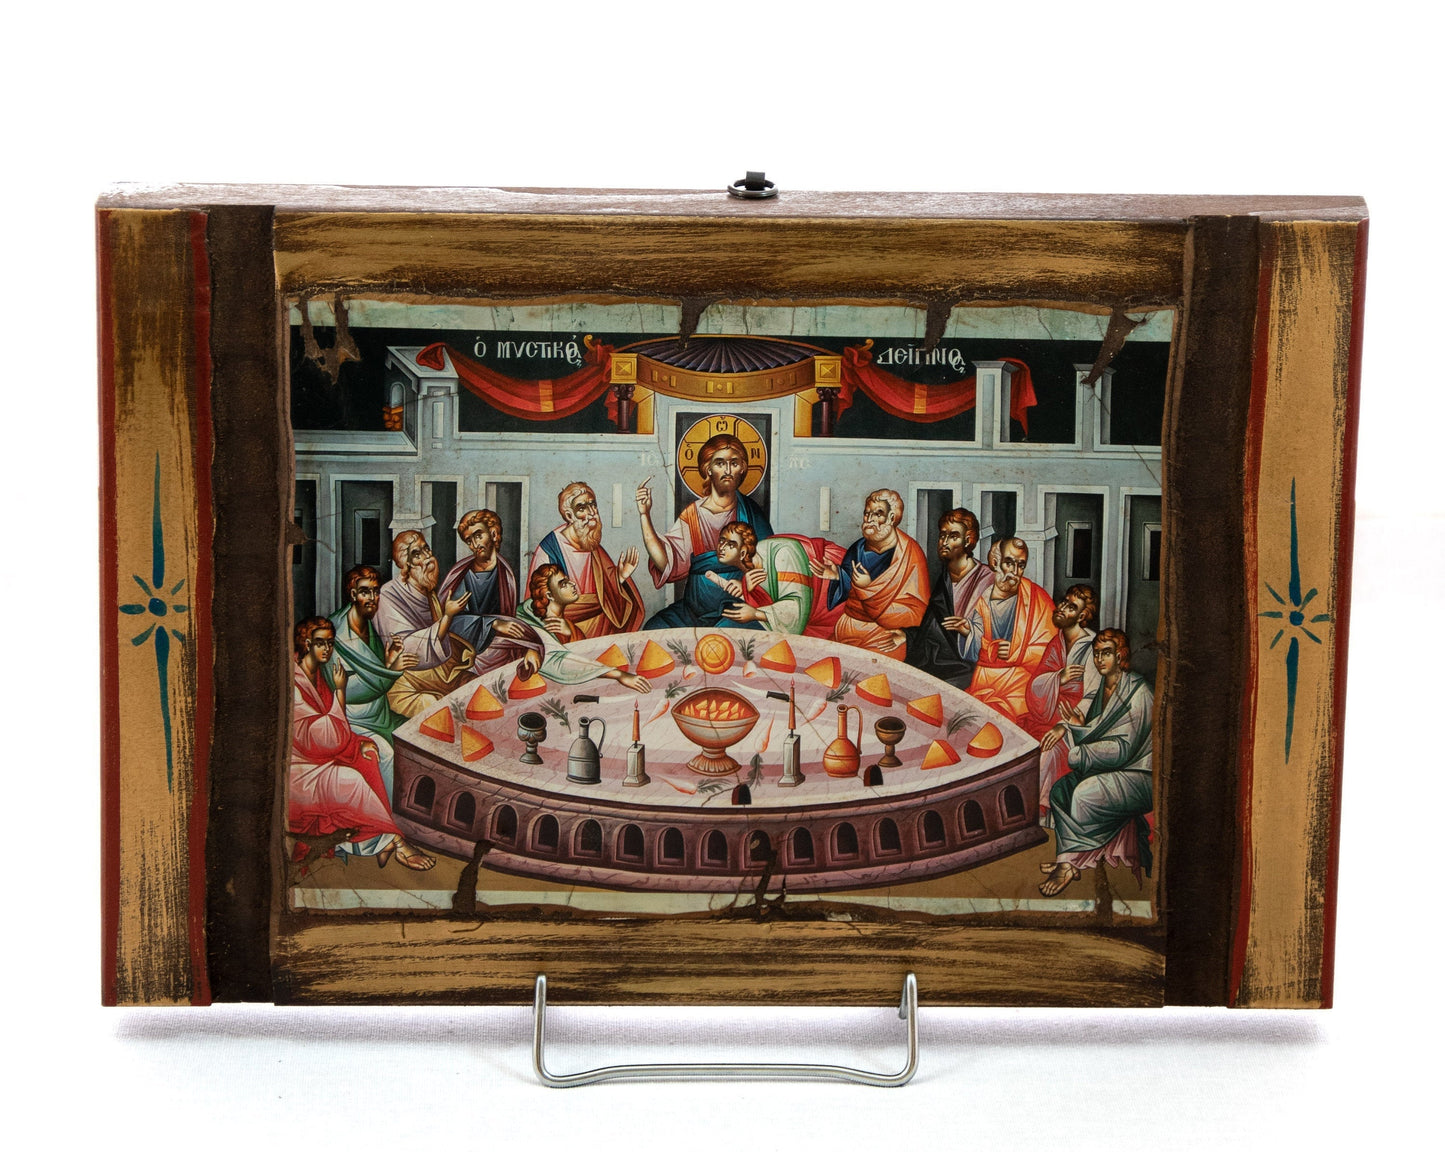 The Last Supper Orthodox icon, Jesus Christ icon, Handmade canvas Byzantine art wall hanging of Holy Communion wood plaque 38x25cm, religious decor TheHolyArt